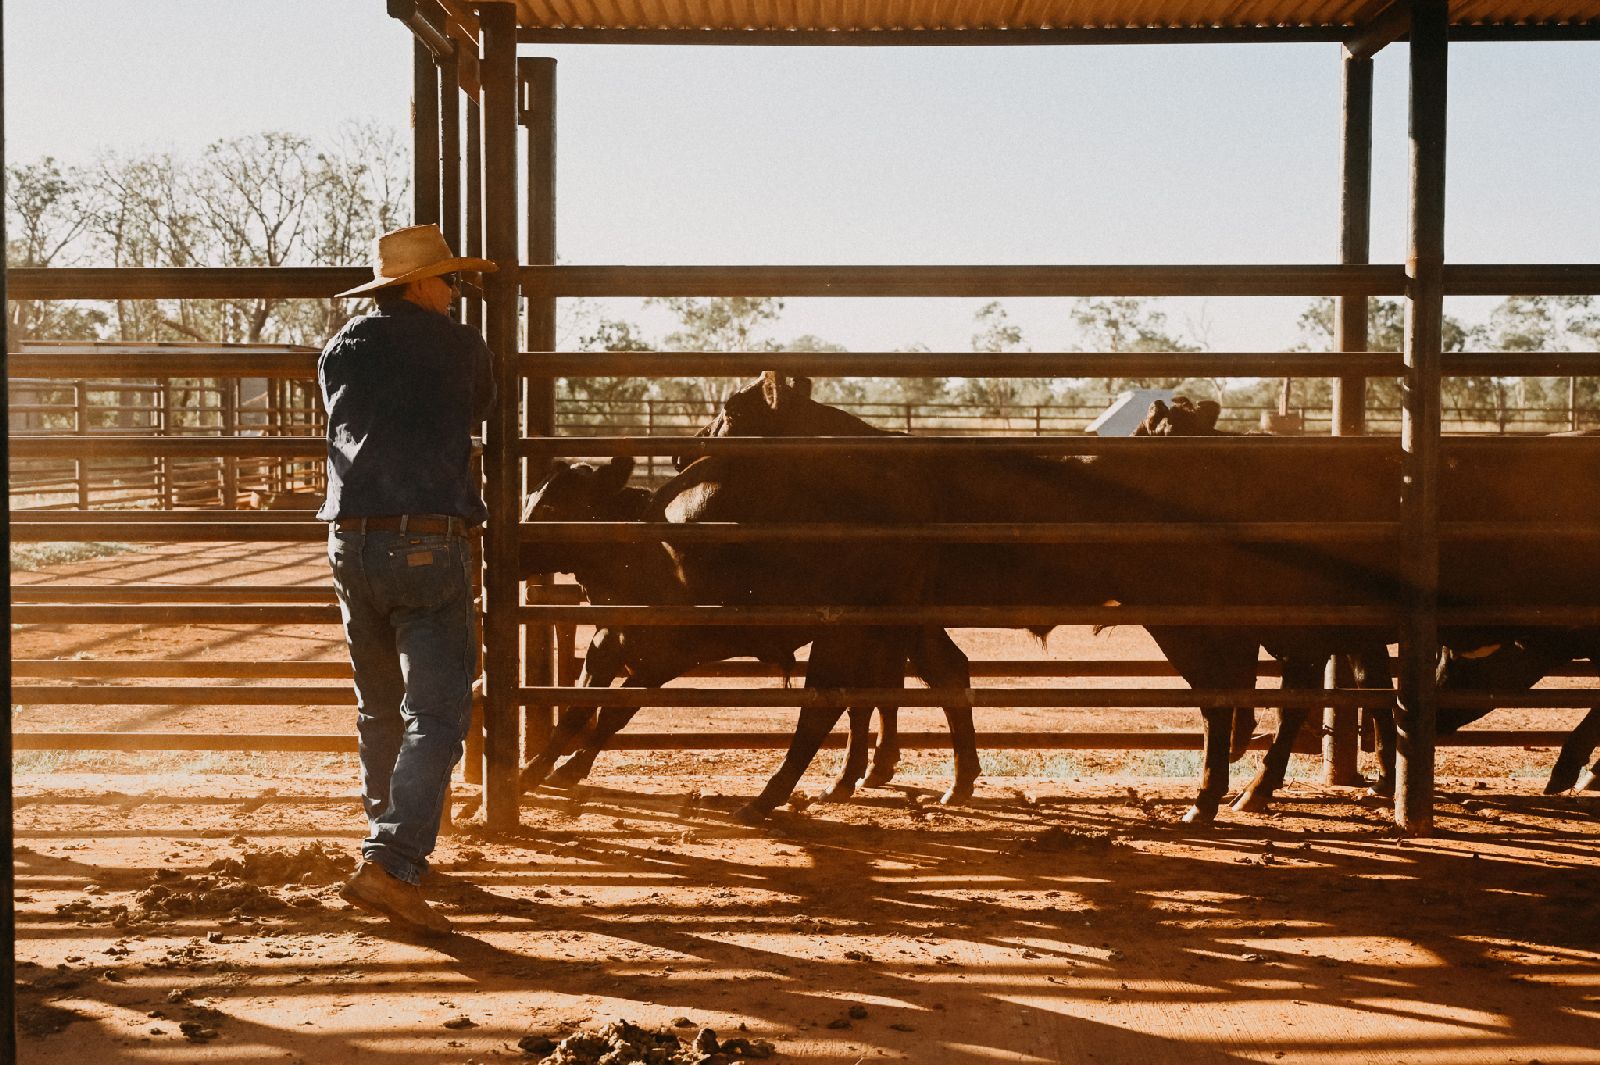 Working on the cattle ranch at the Bullo River Station in Australia